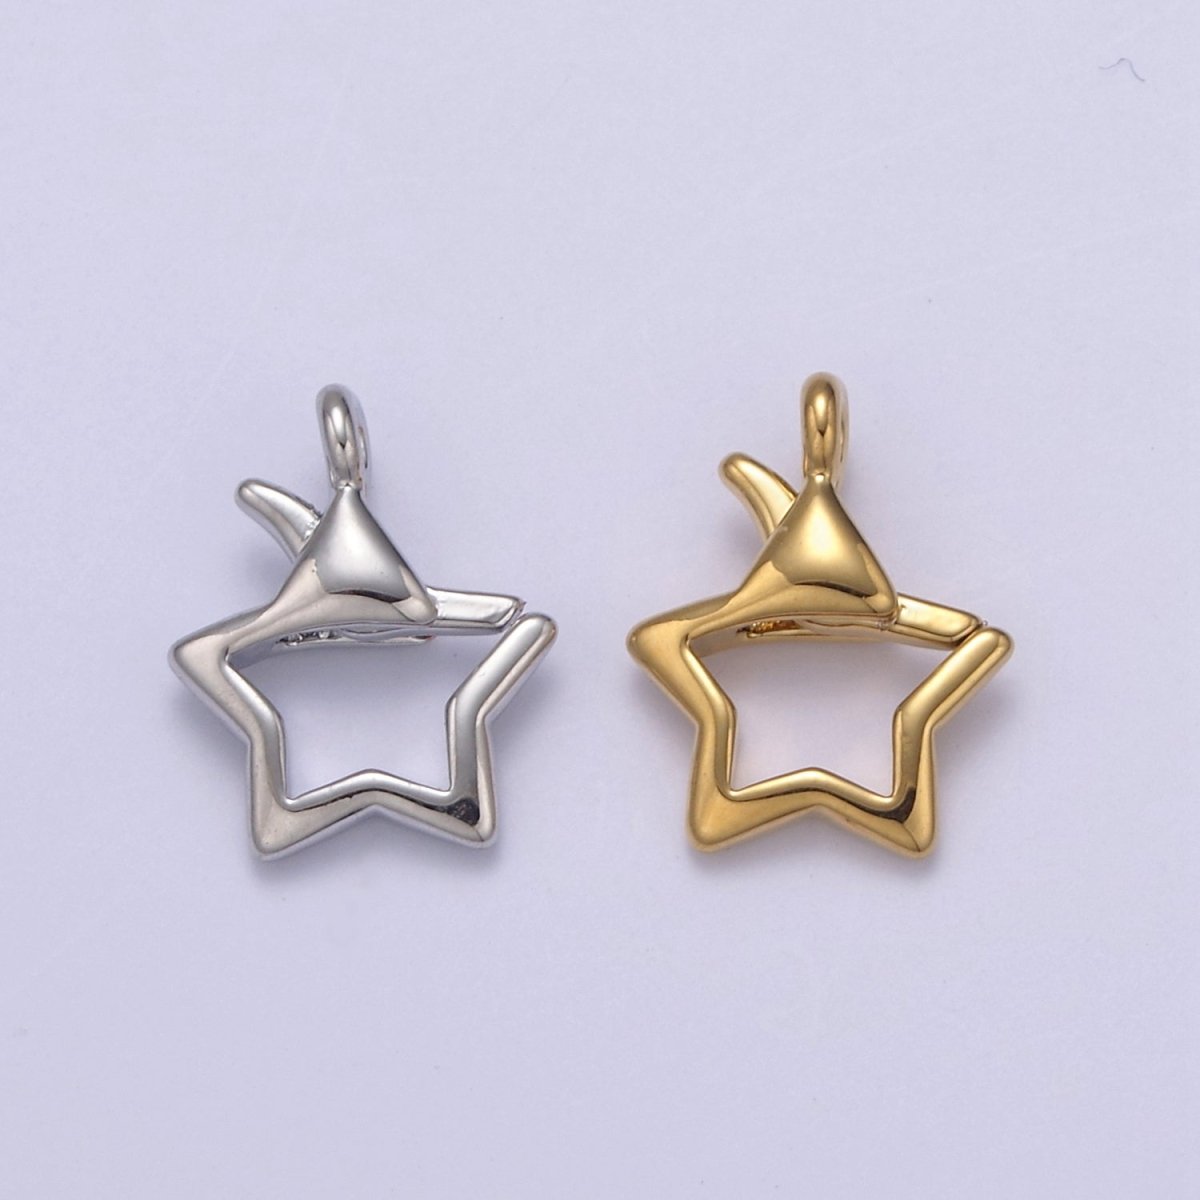 Gold or Silver Open Star Lobster Clasp, 15x11mm, Open Star Lobster Clasp, Star Charm Enhancer Clasp Wholesale Supply L-659 L-658 - DLUXCA